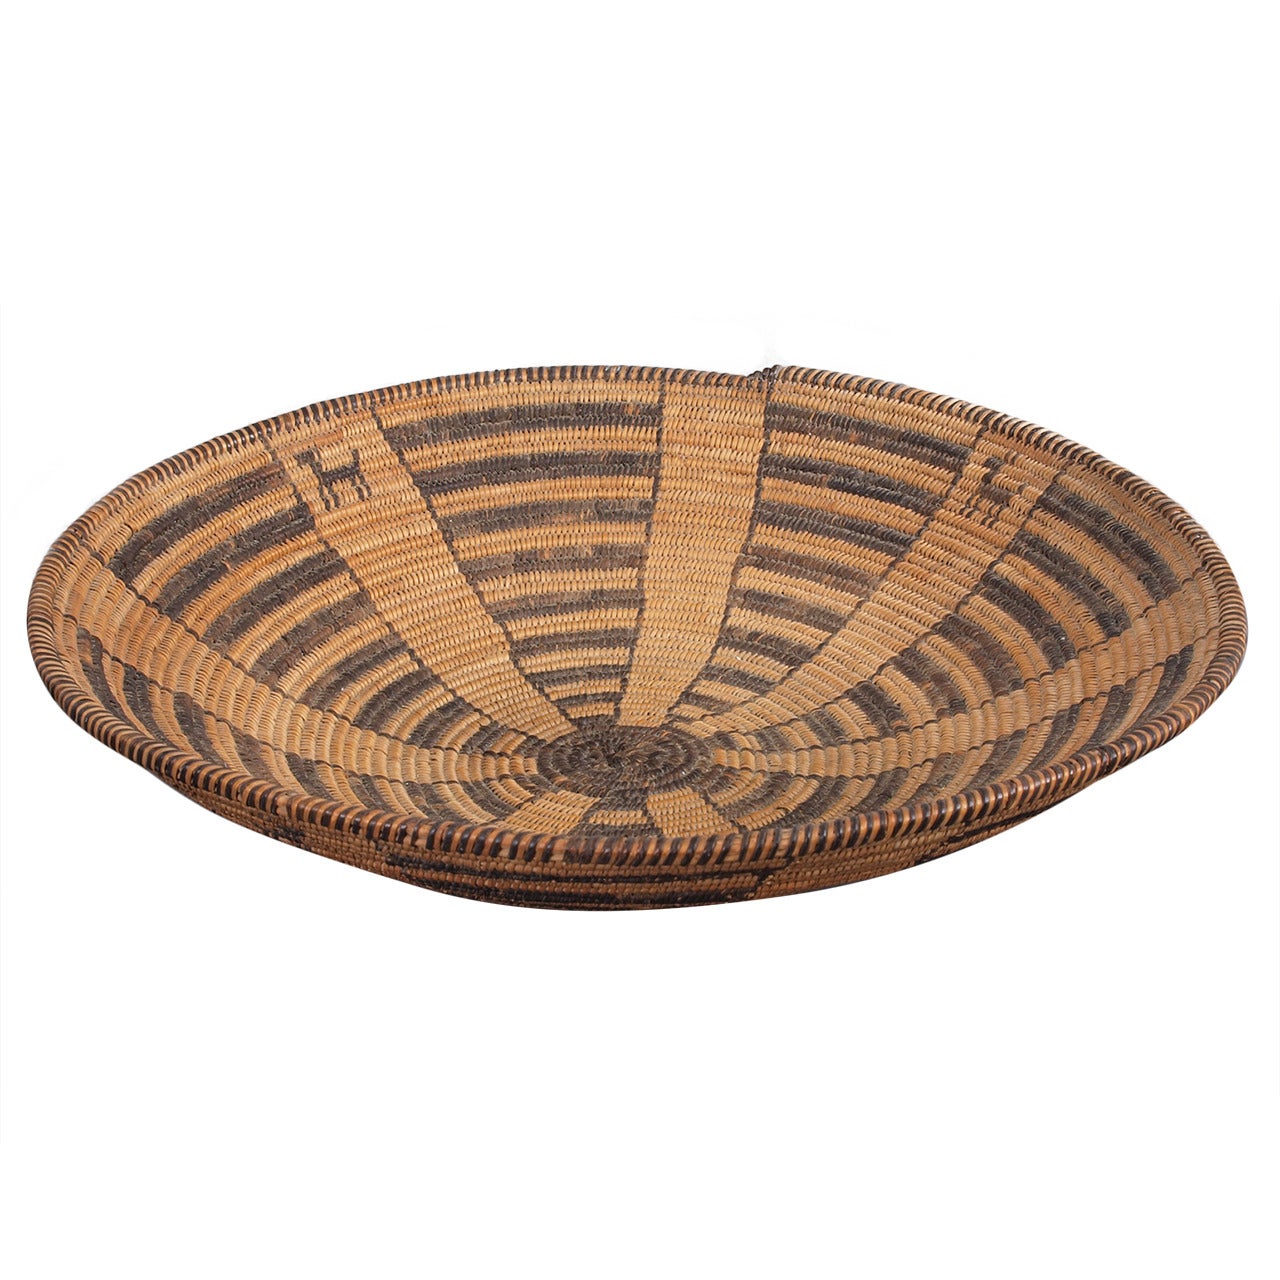 Antique Native American Pictorial Basketry Tray, Apache 19th Century